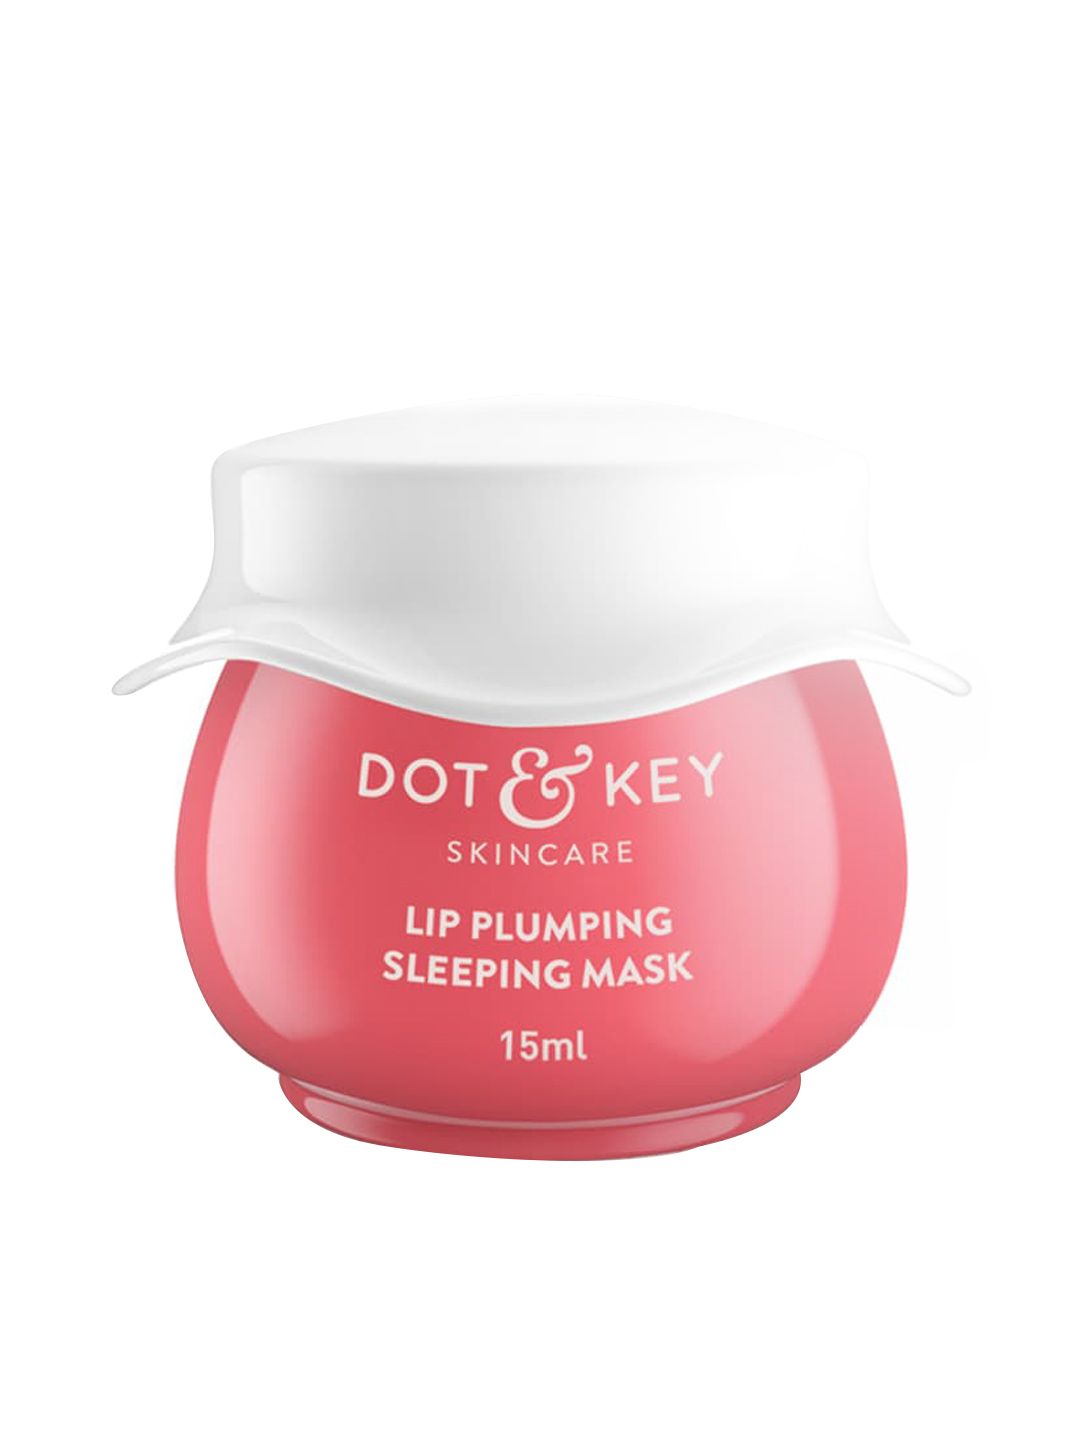 DOT & KEY Vitamin C + E Lip Mask with Shea Butter for Dry & Dark Lips - 15 ml Price in India